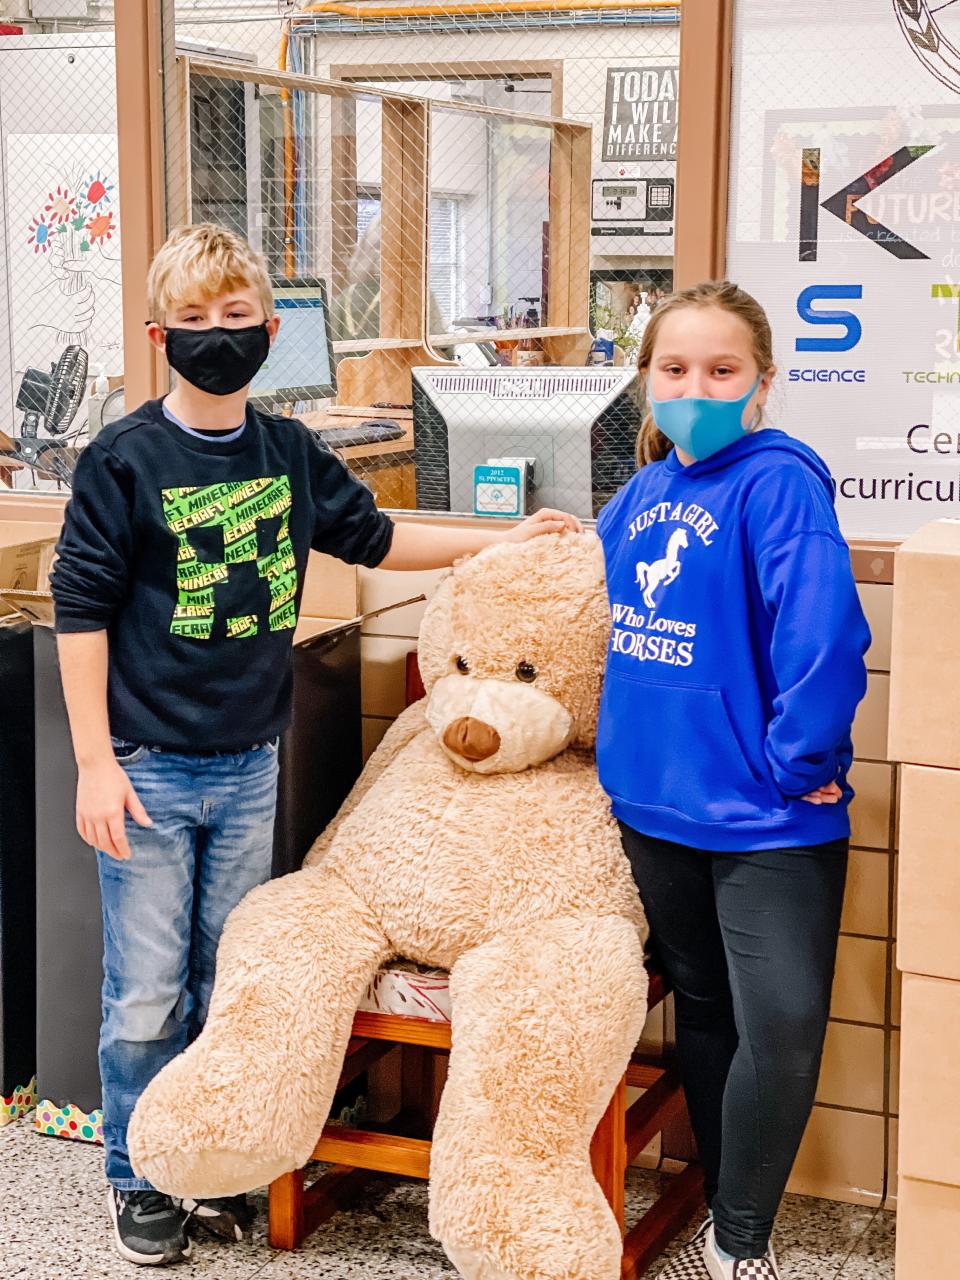 A large teddy bear was donated during the South Knoxville Elementary School council’s toy drive in January 2022.